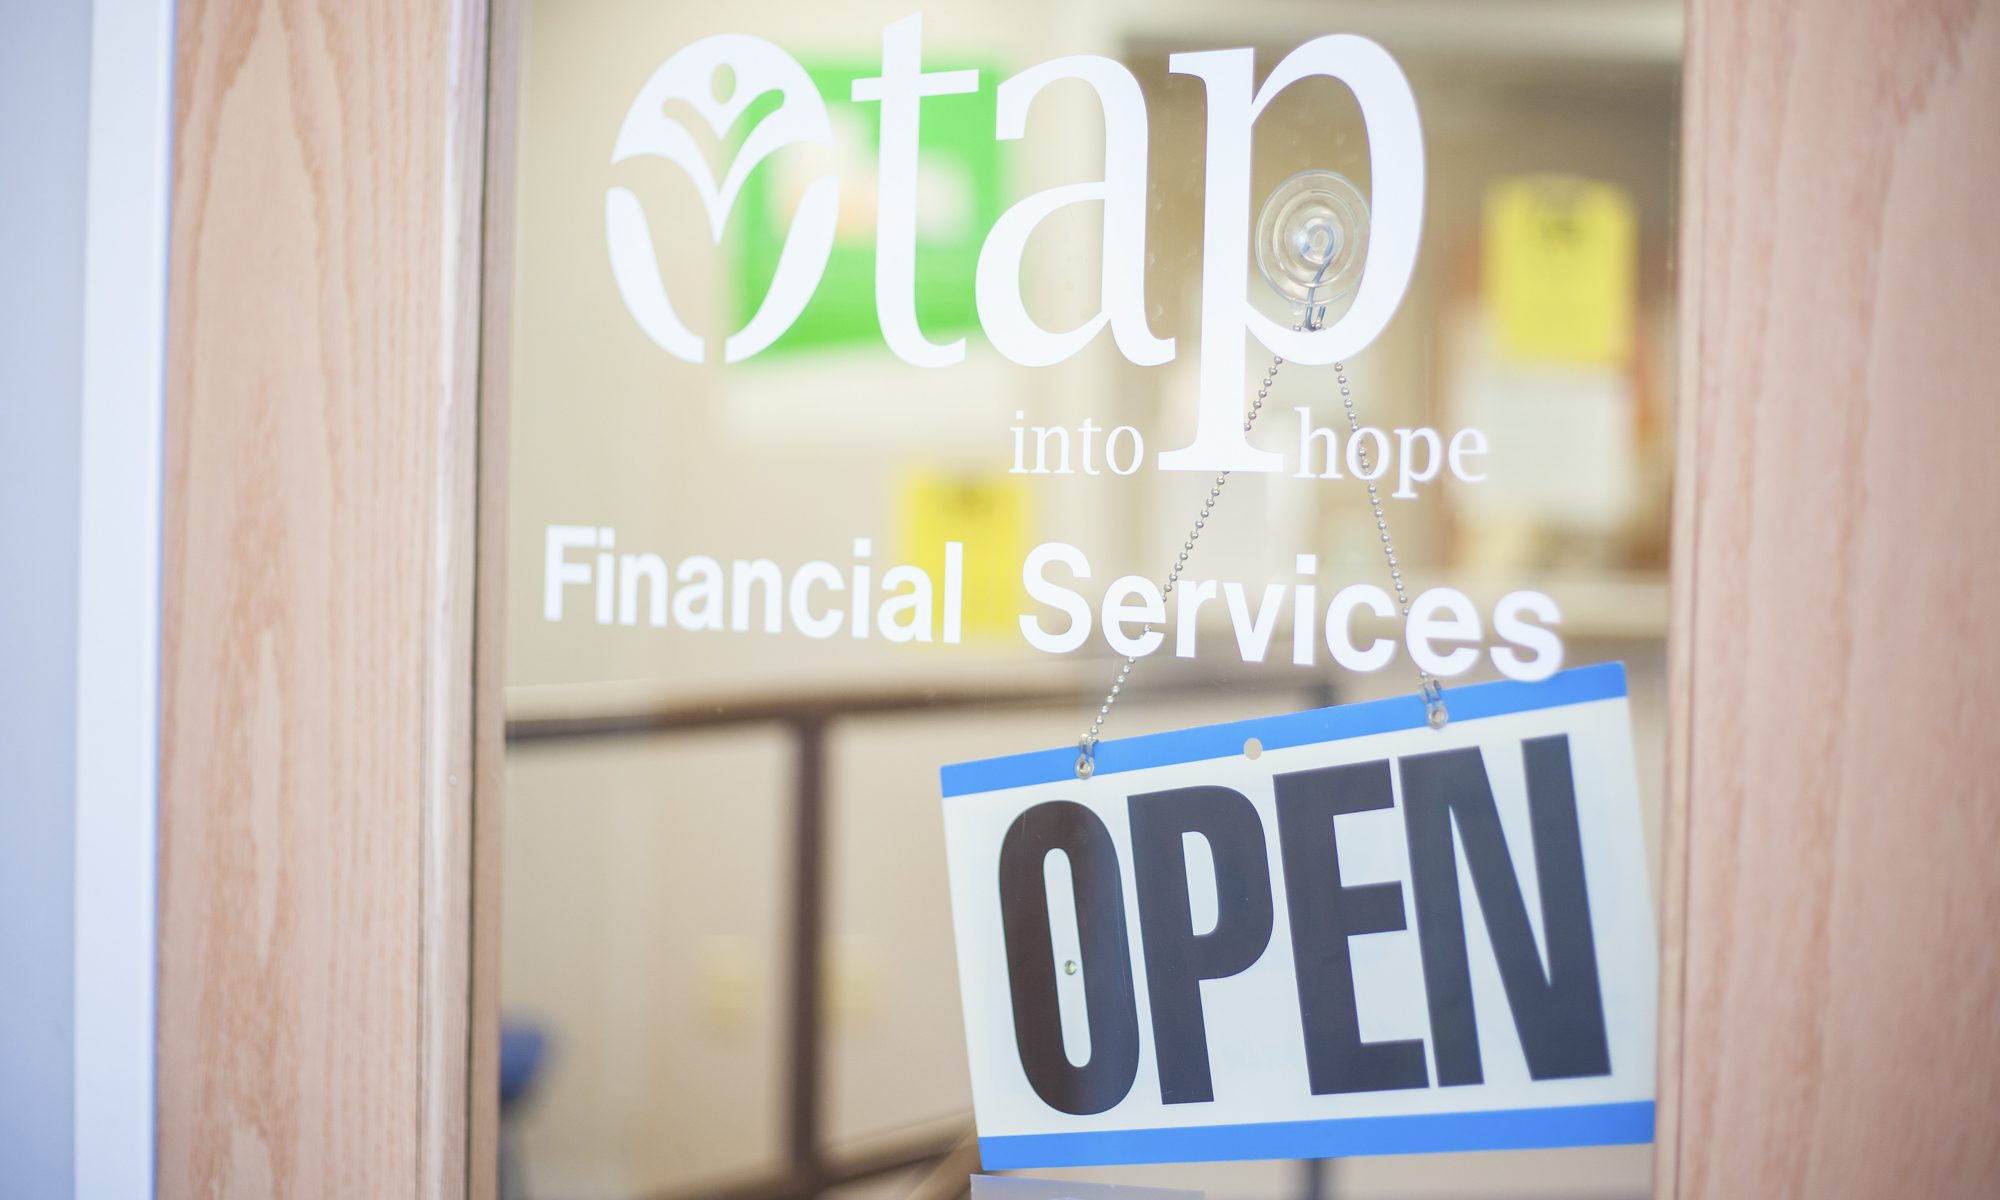 TAP Personal Finance Services